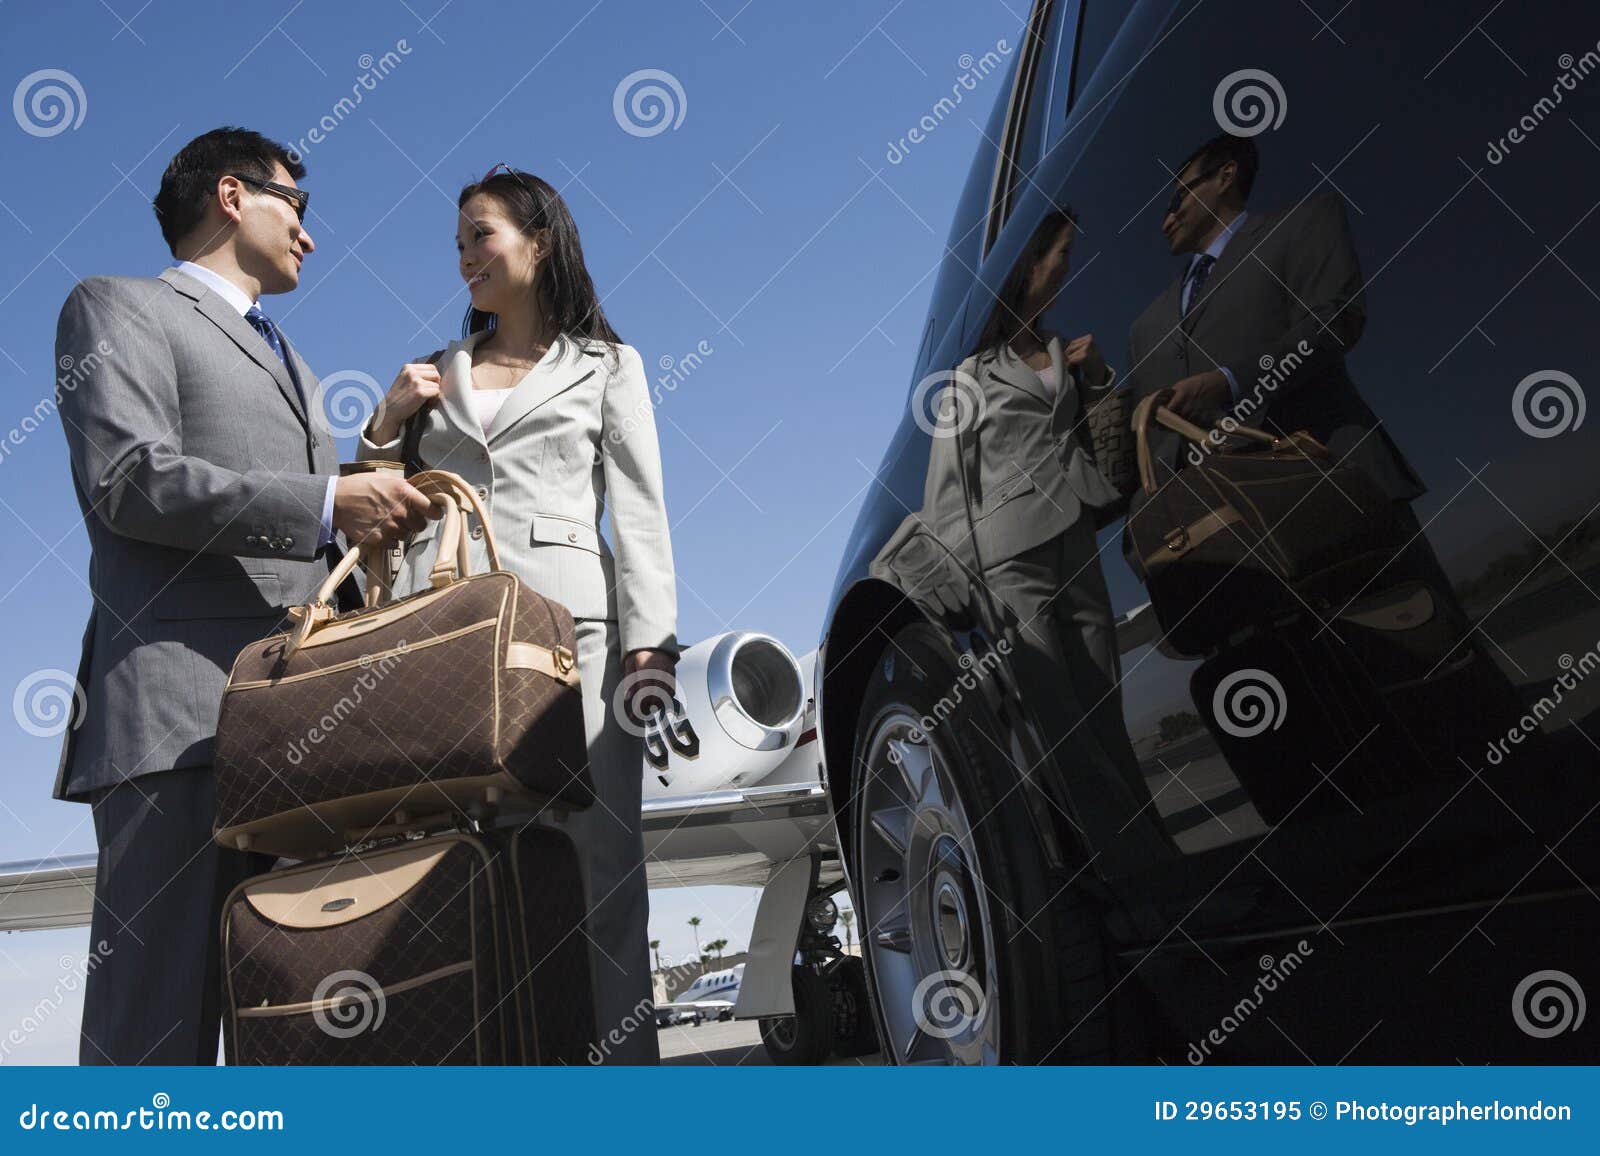 business couple standing together at airfield